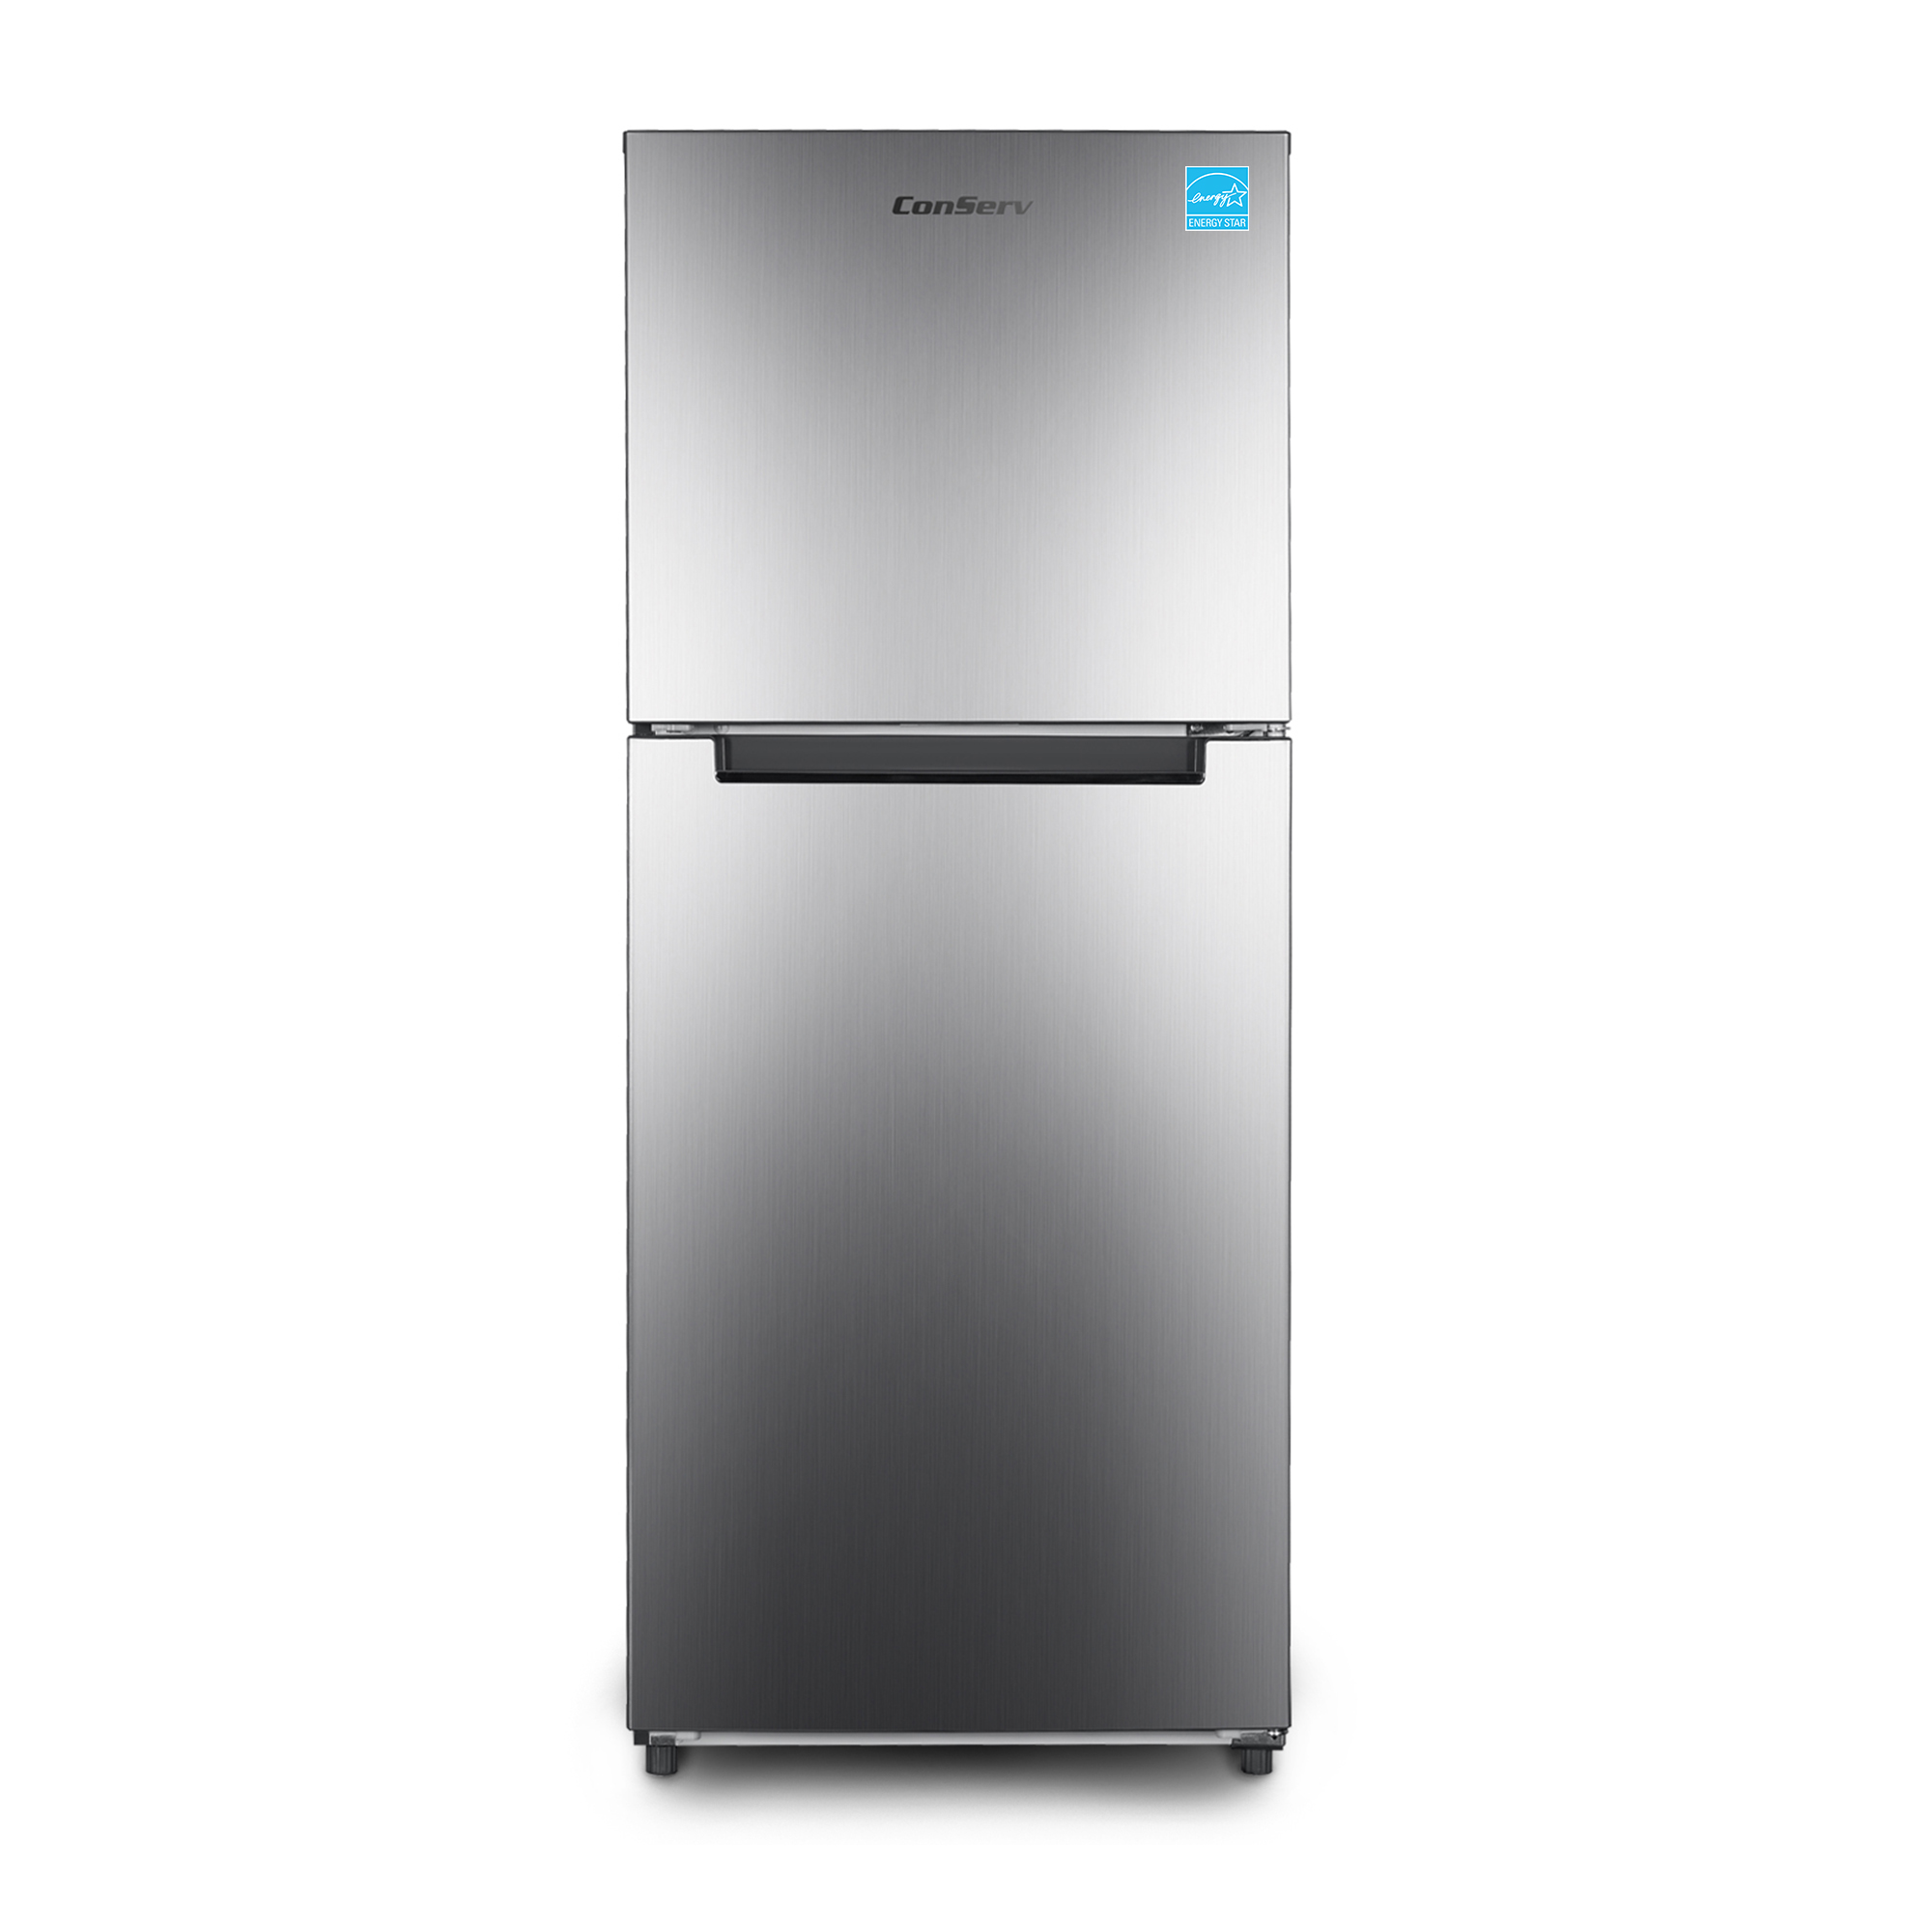 Conserv 10 cu.ft Stainless Top Freezer Refrigerator Frost Free with Reversible Door